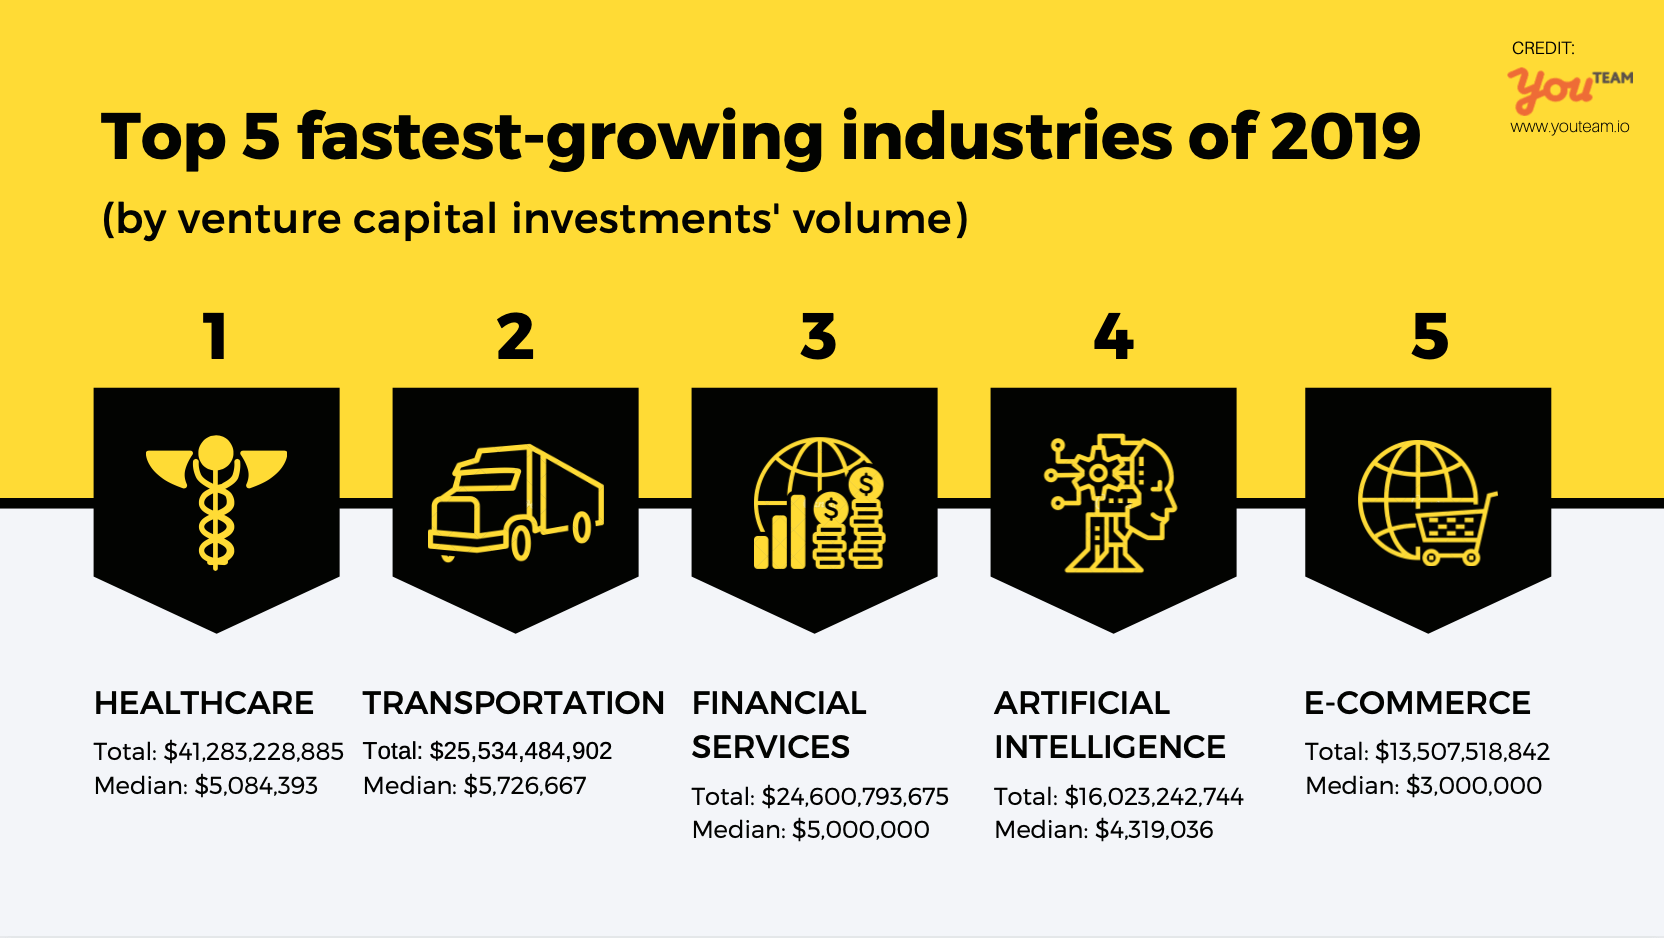 Top 5 Fastest Growing Industries Of 2019 By Money Invested